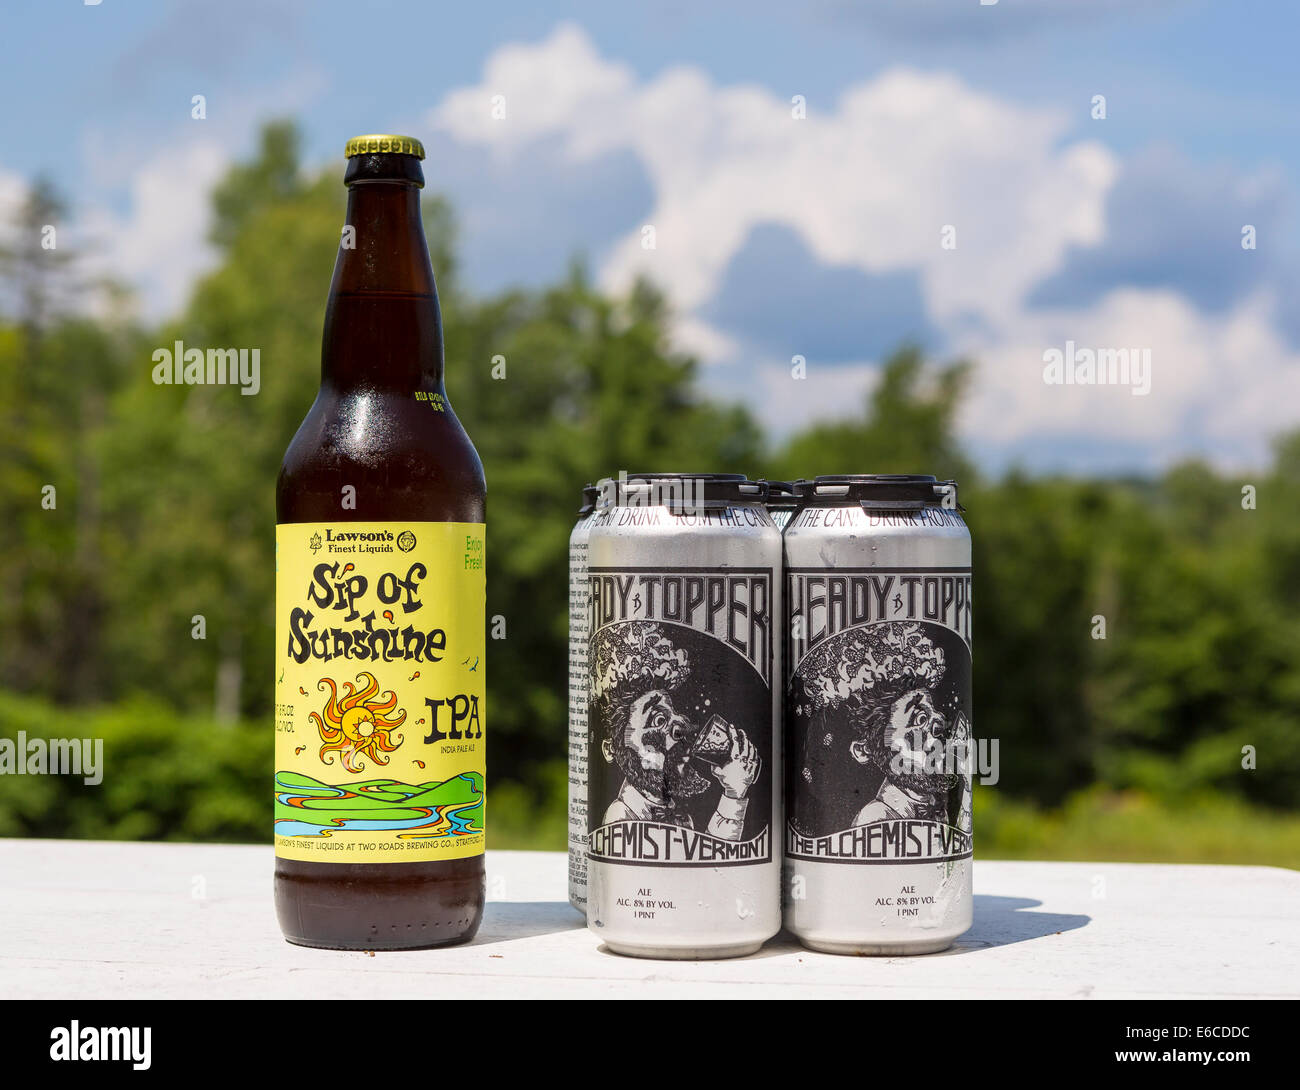 VERMONT, USA - Lawson's Sip of Sunshine, and Heady Topper, craft beers made in Vermont. Stock Photo